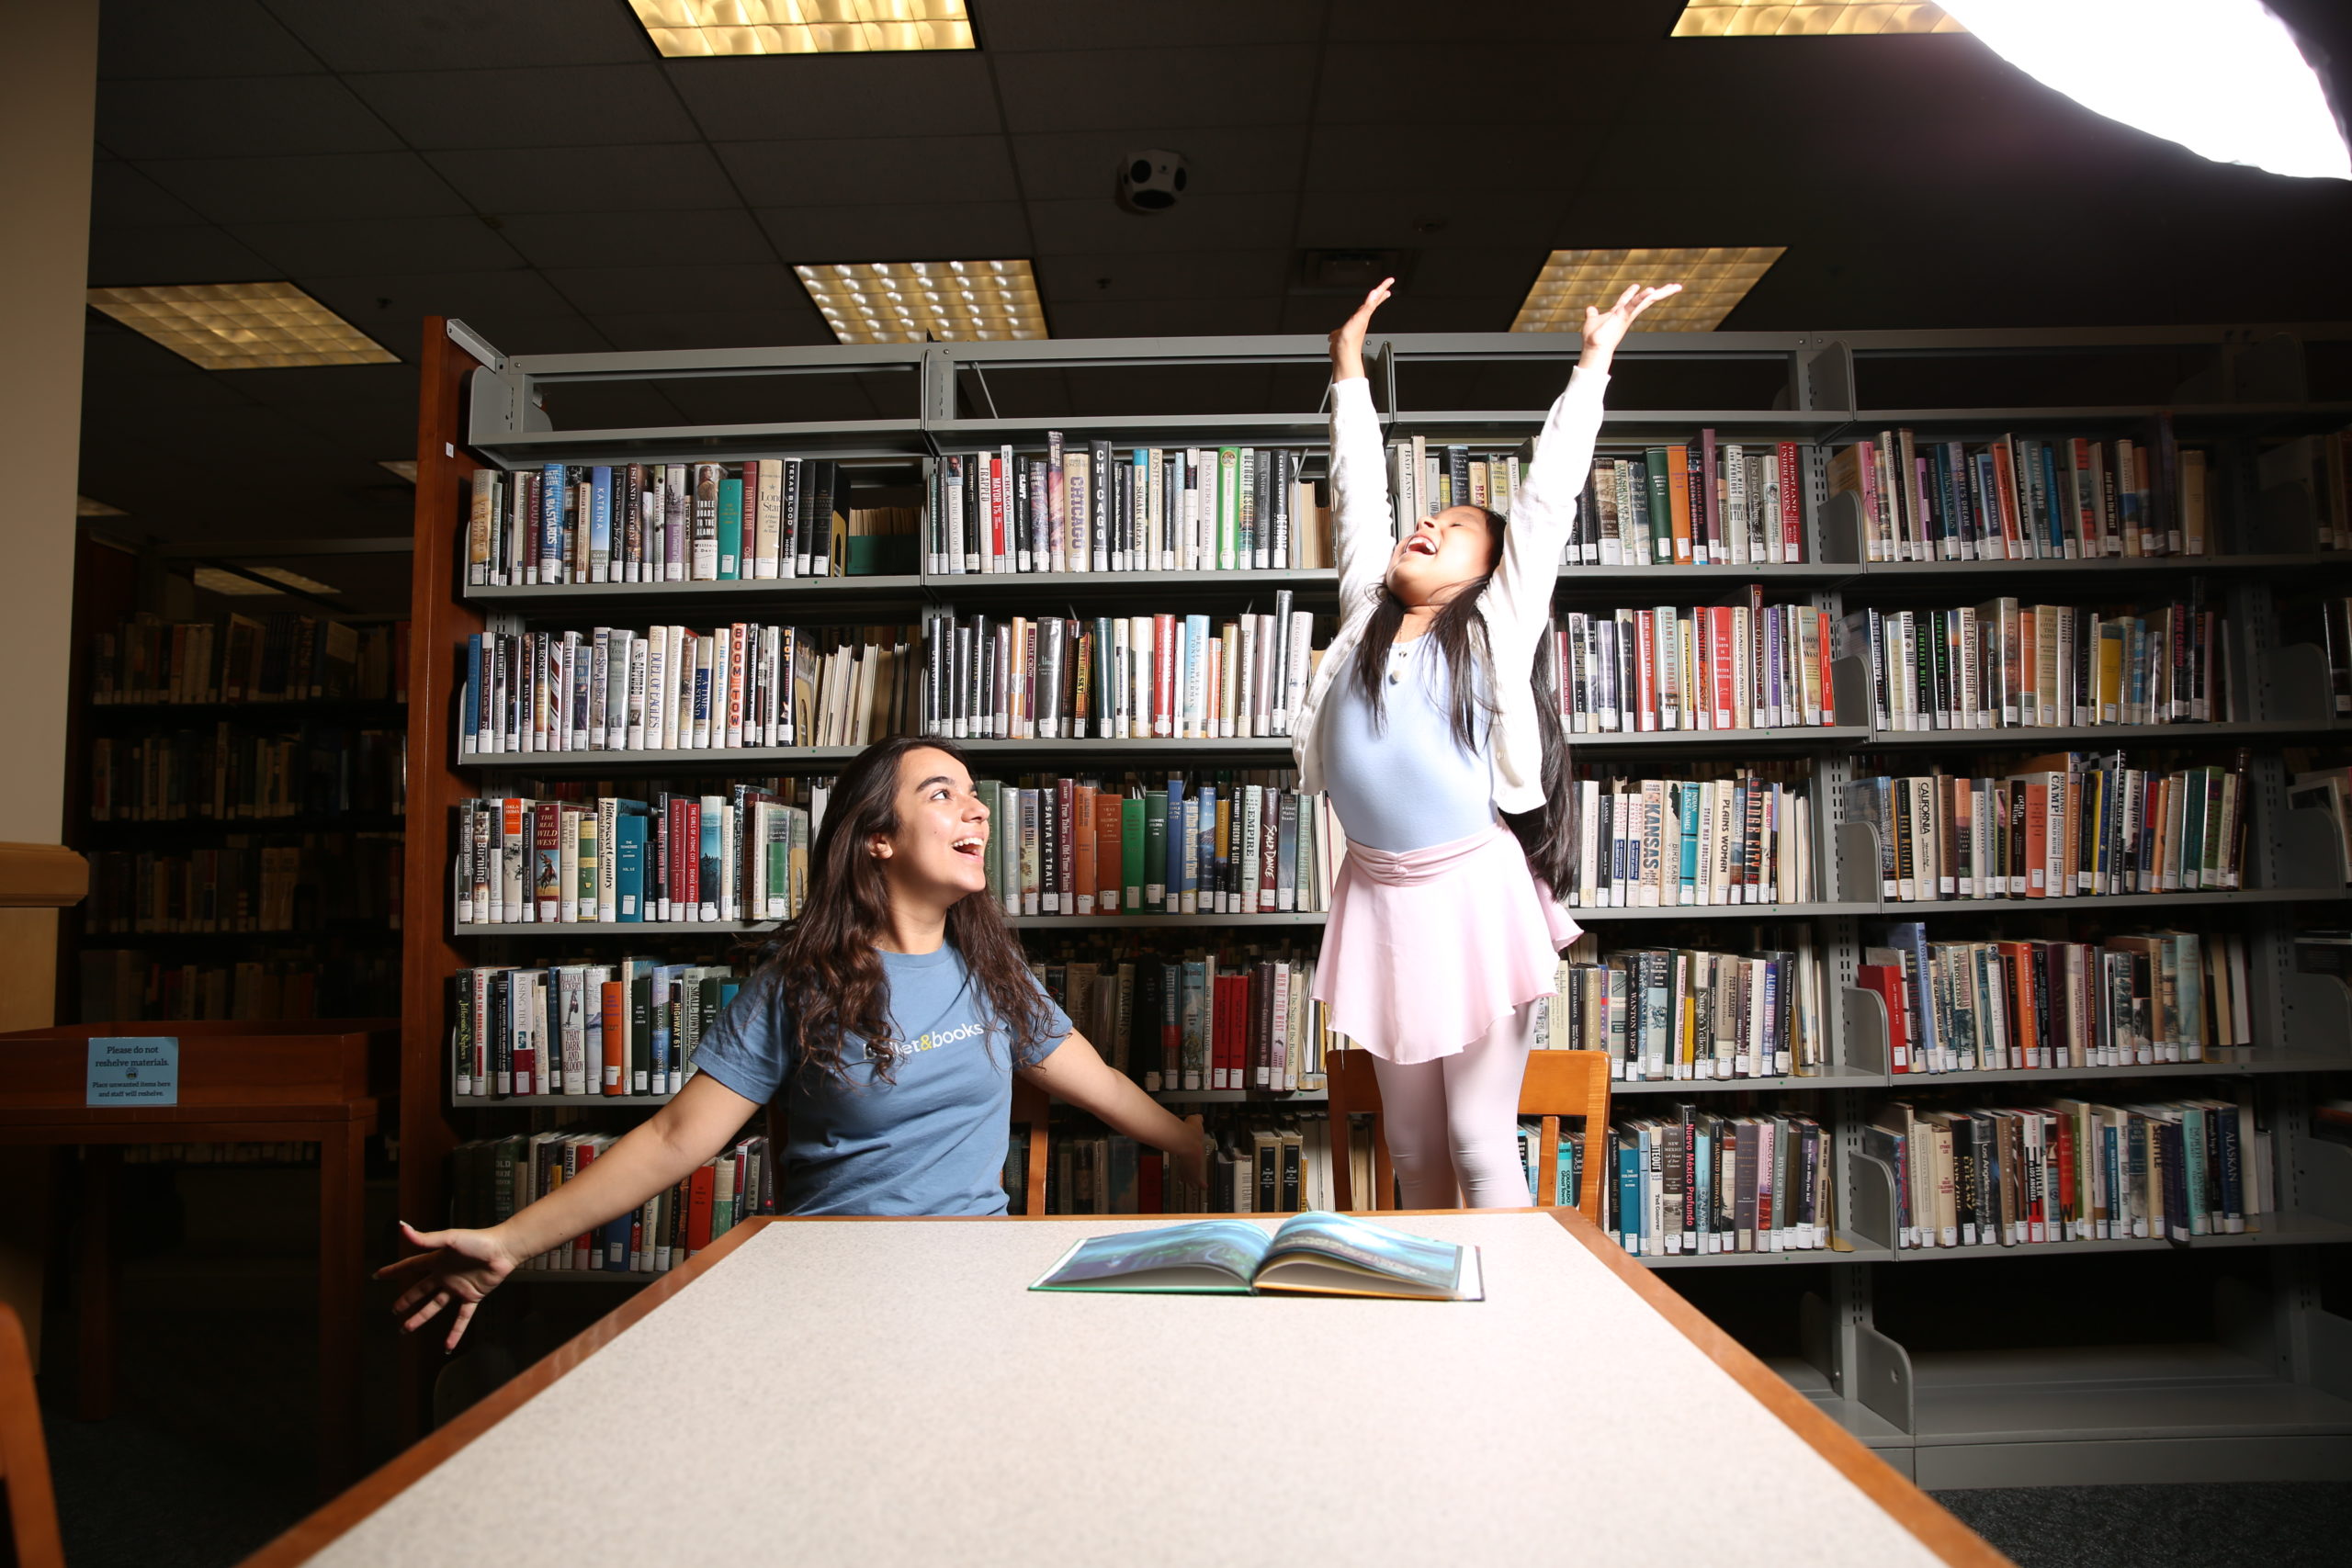 A college-age woman and girl ballet student are in a library at a bale in front of shelves of books. The little girl, dressed in a blue leotard, pink tights, pink skirt and white cardigan sweater stands on her chair and reaches her arms up above her head while lookig up toward the ceiling with a huge smile. The college-age dancer sits next to her and opens her arms wide to the side and makes jazz hands. She wears a blue T-shirt and smiles toward the little girl.